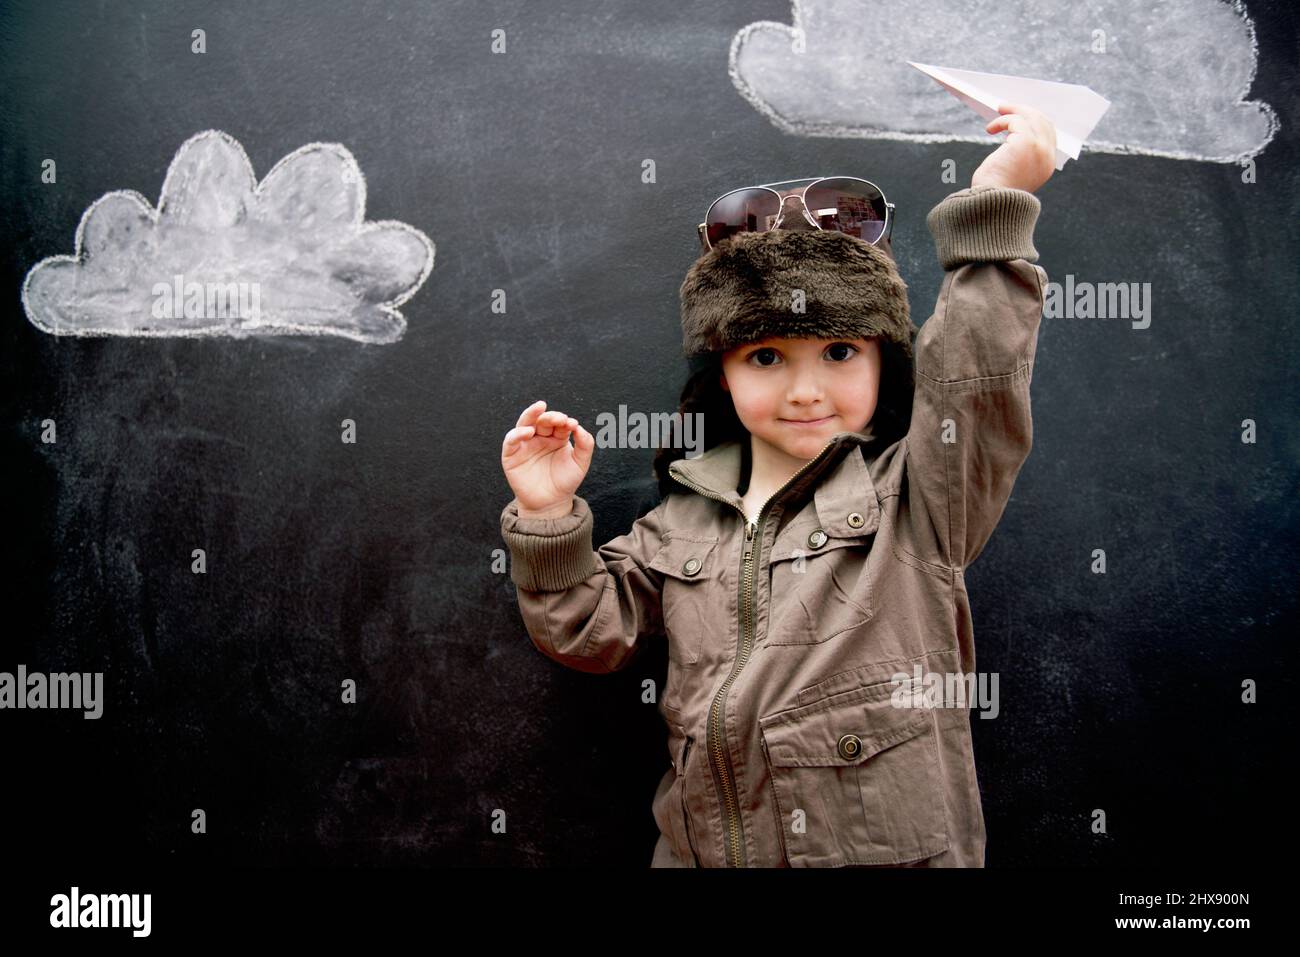 With education, anything is possible. A little boy playing with an airplane in front of clouds drawn on a blackboard. Stock Photo